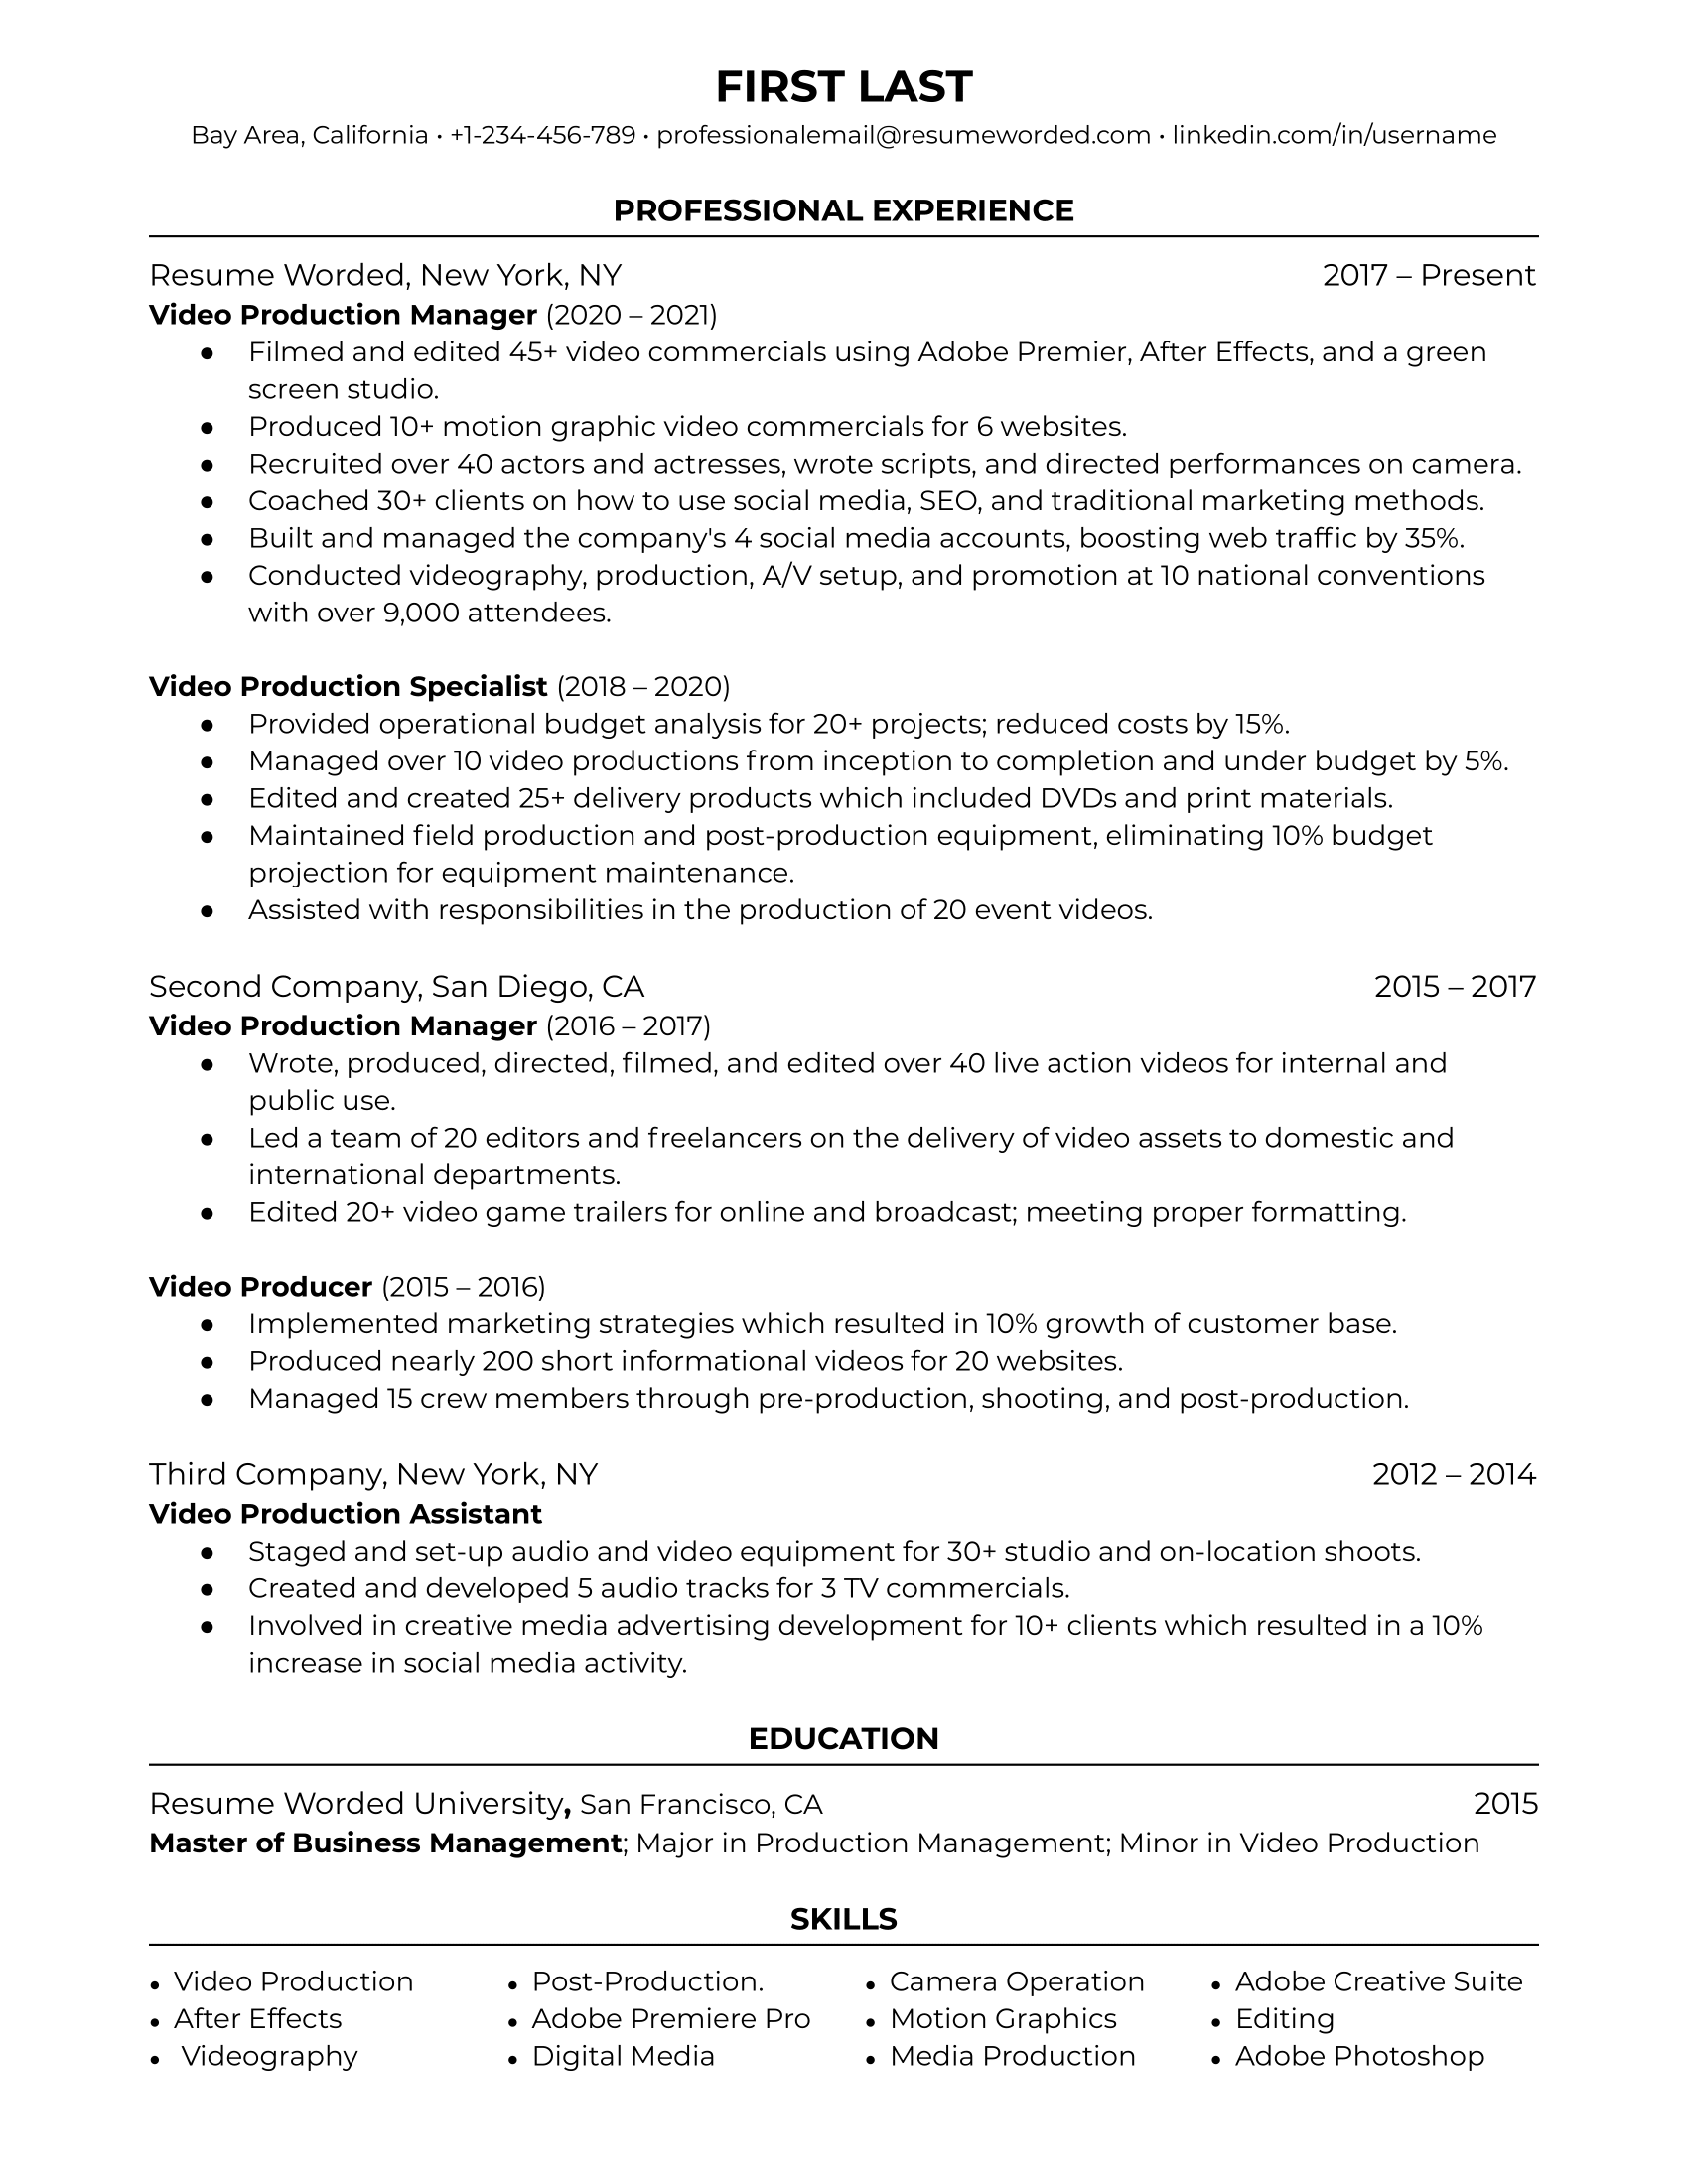 Video Production Manager Resume Sample